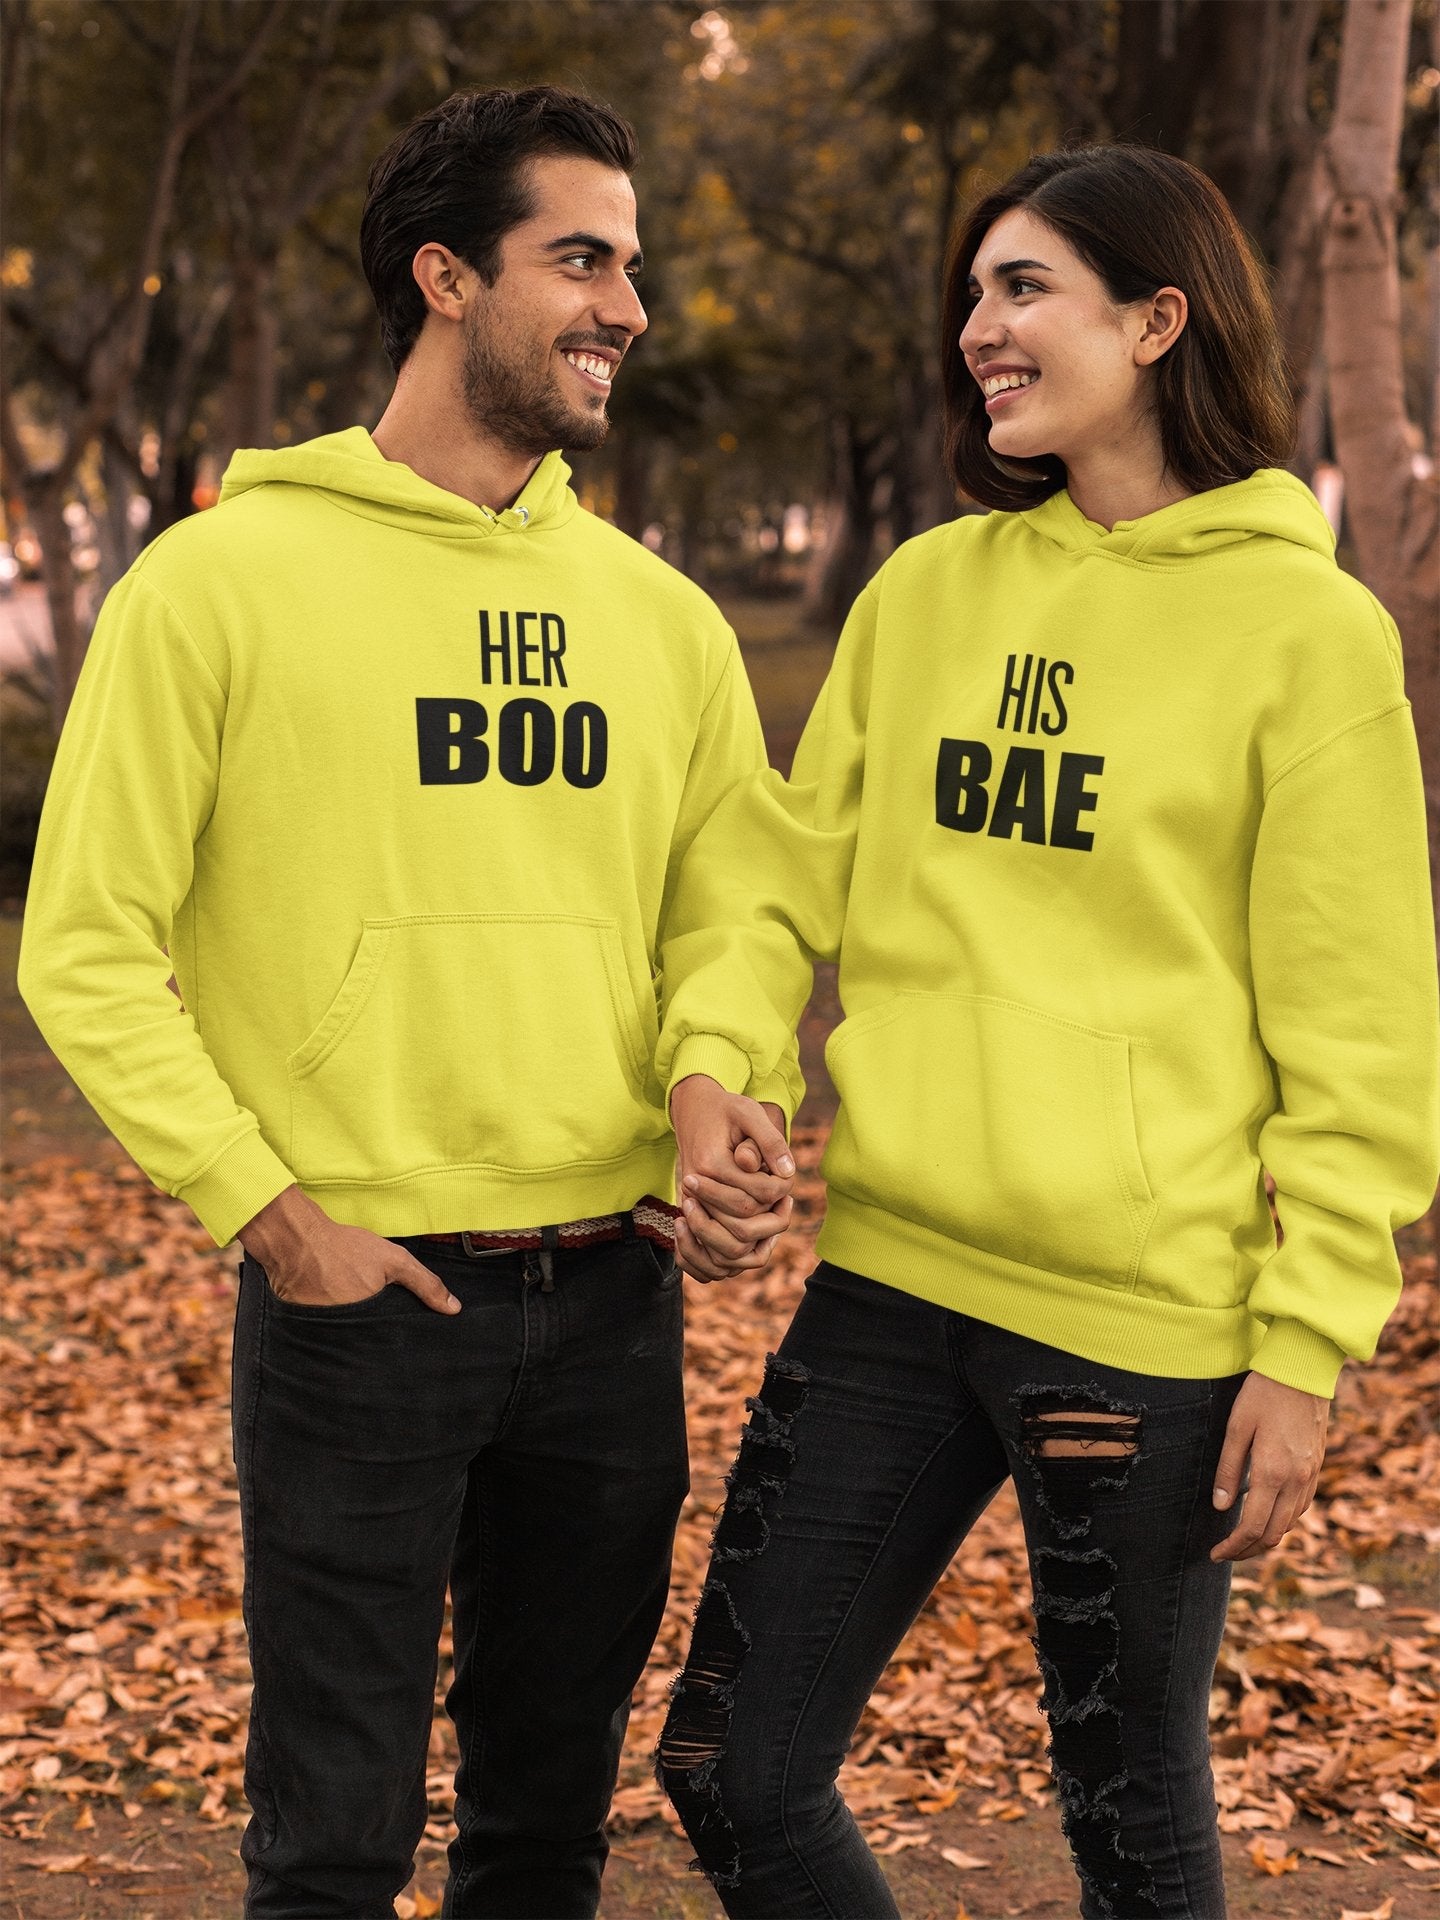 Babe Boo Couple Hoodie-FunkyTradition - FunkyTradition